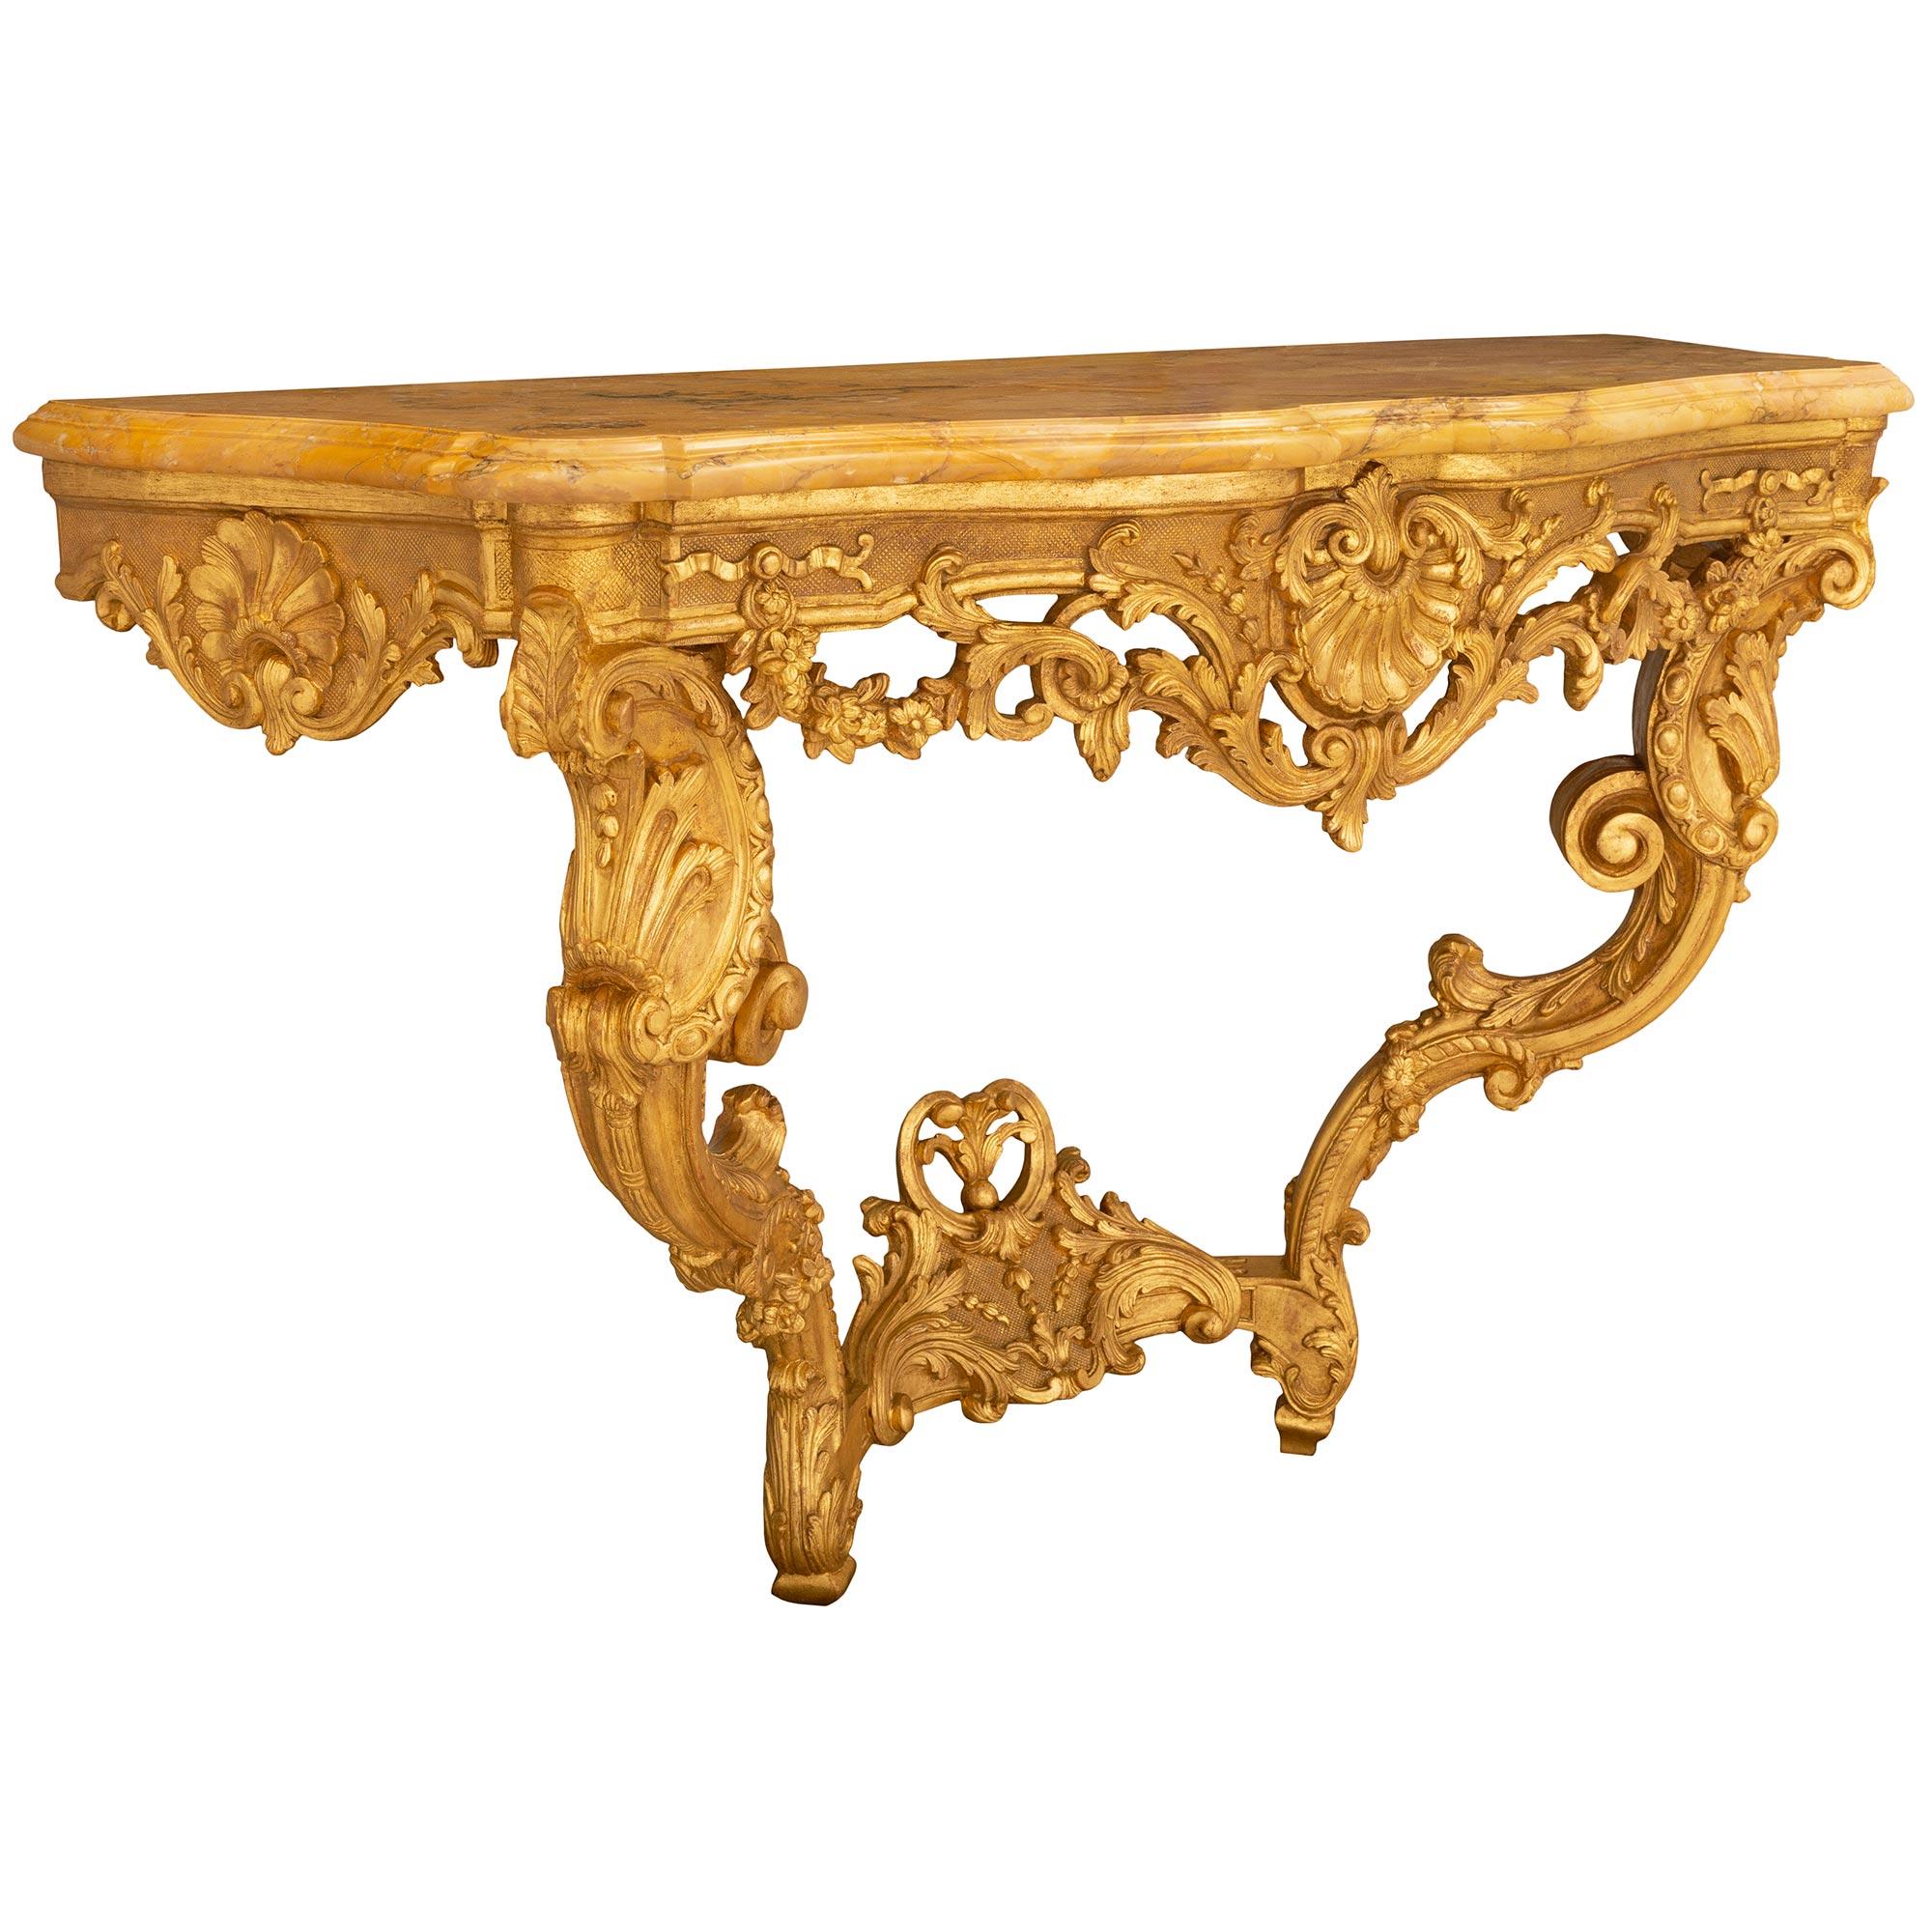 French 18th Century Régence Period Giltwood and Sienna Marble Console Circa 1720 In Good Condition For Sale In West Palm Beach, FL